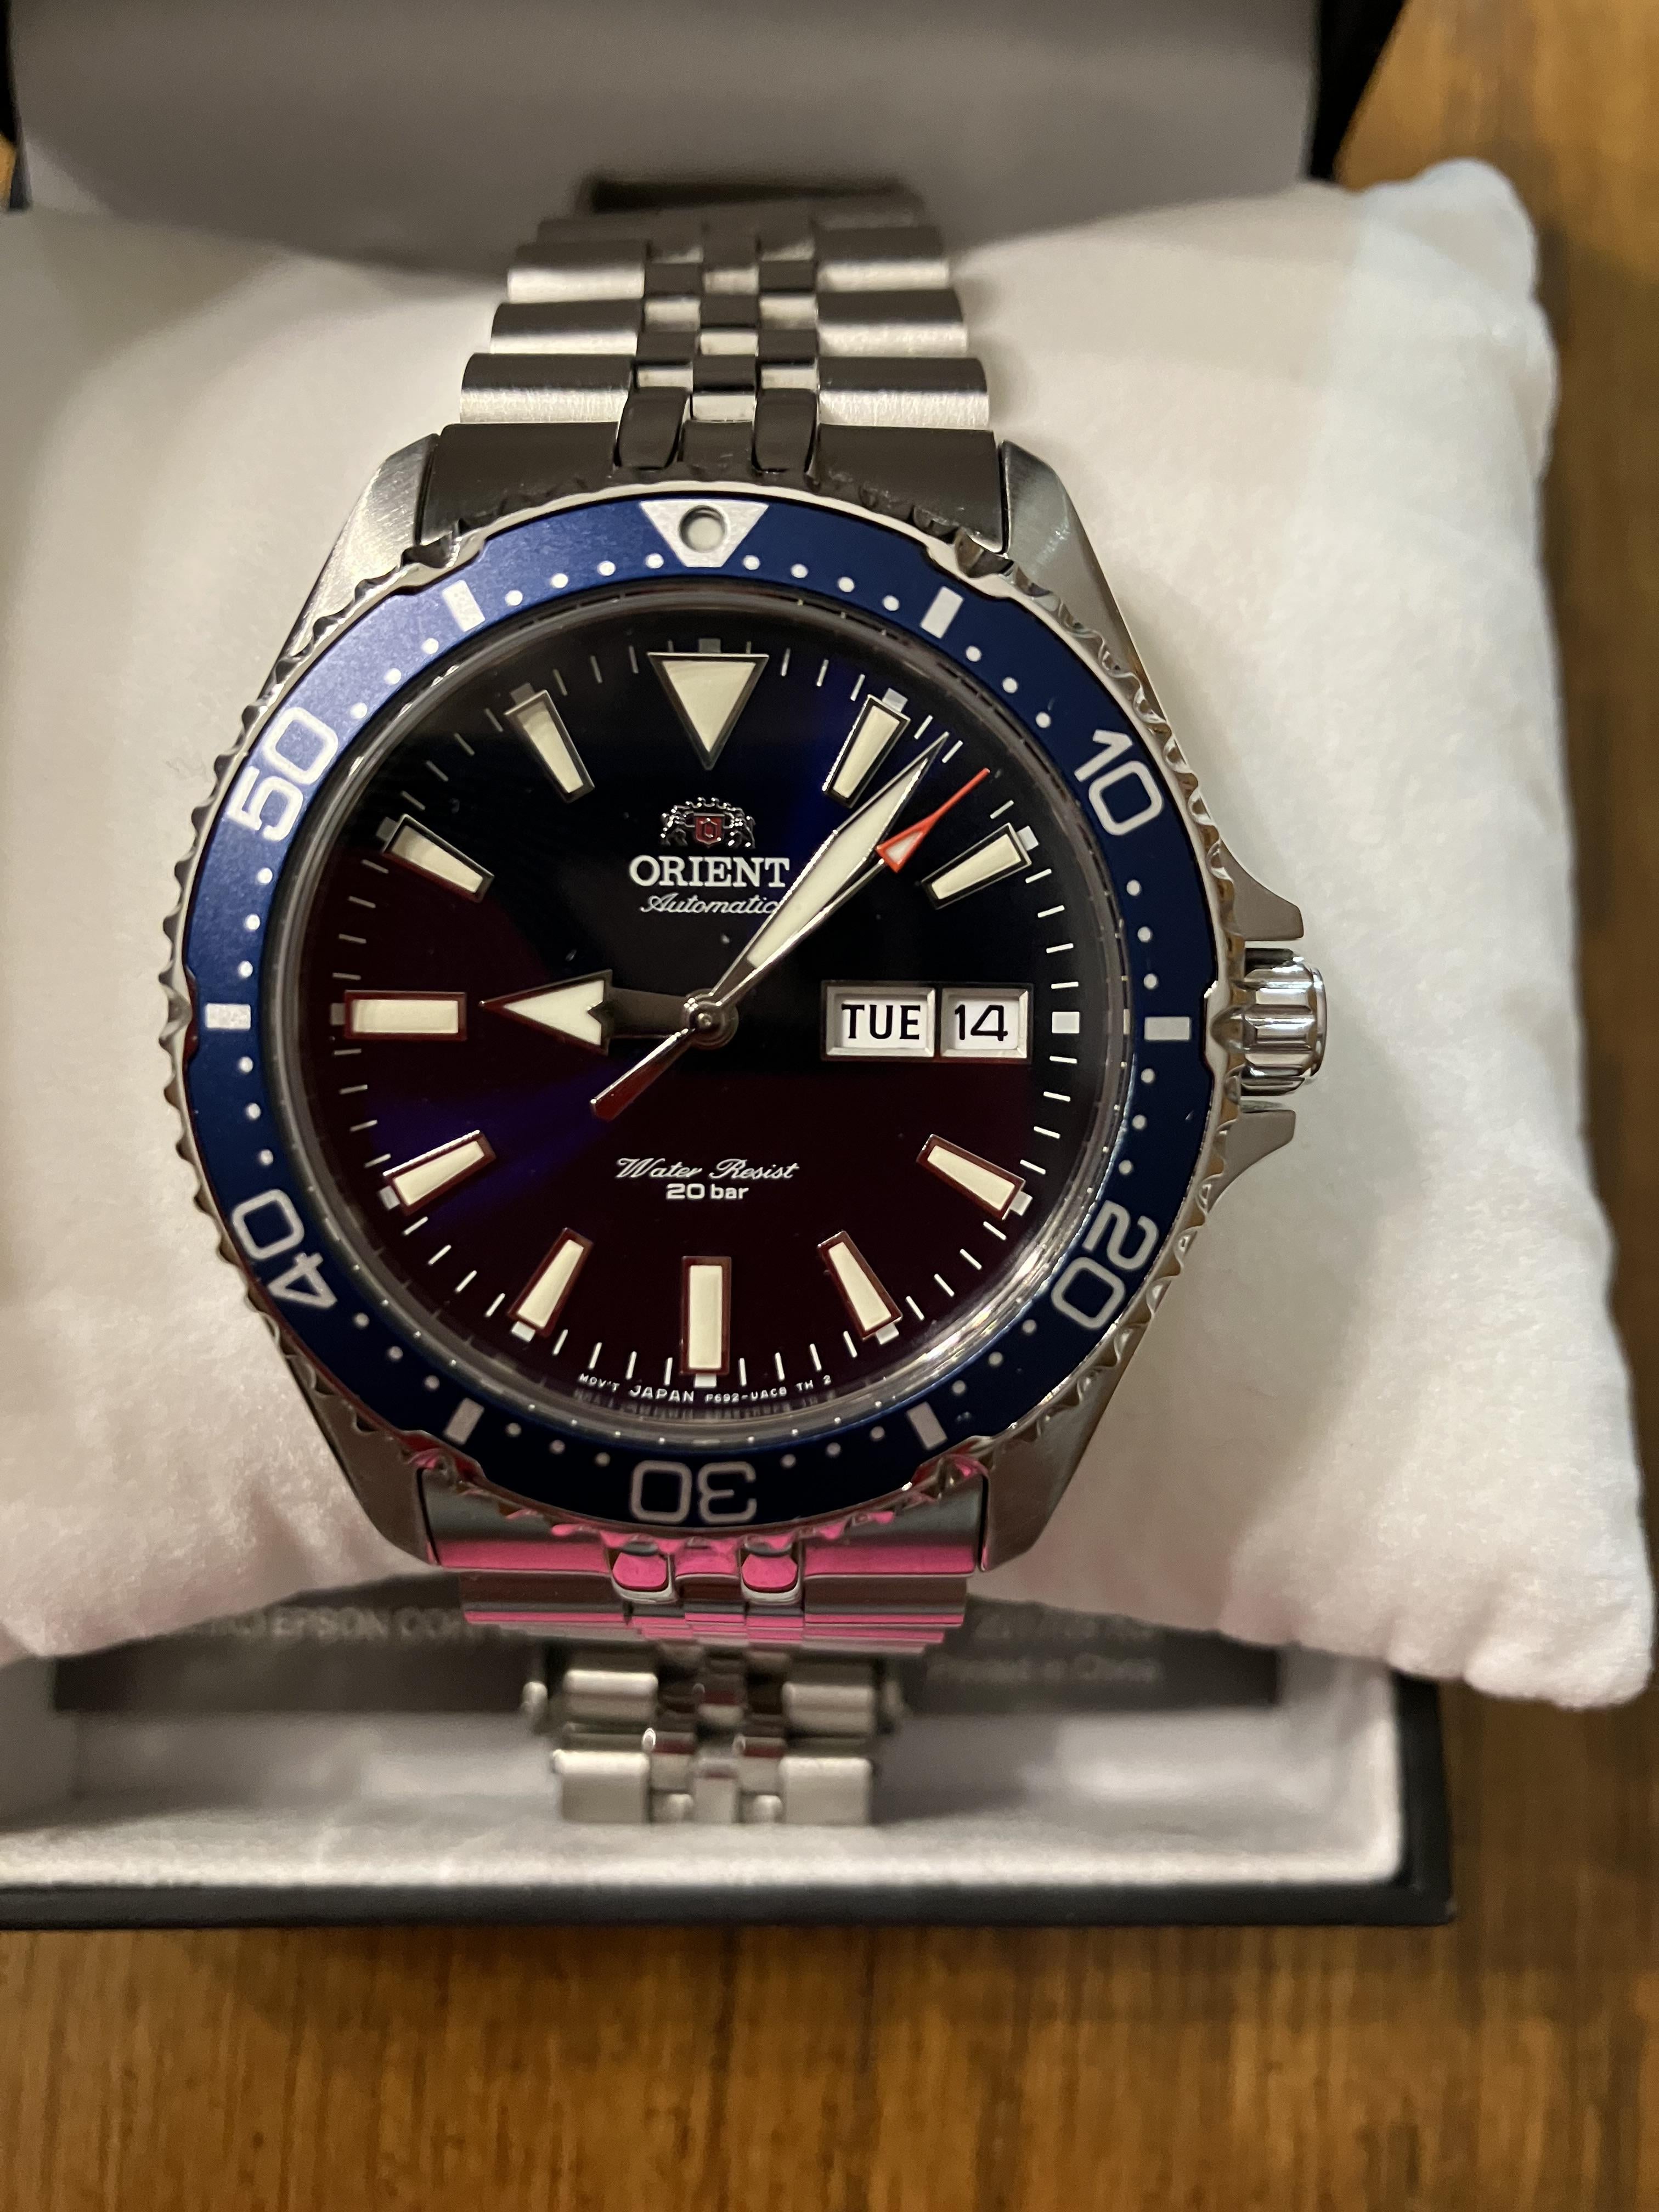 WTS] Orient Kamasu automatic diver blue dial full kit + Strapcode